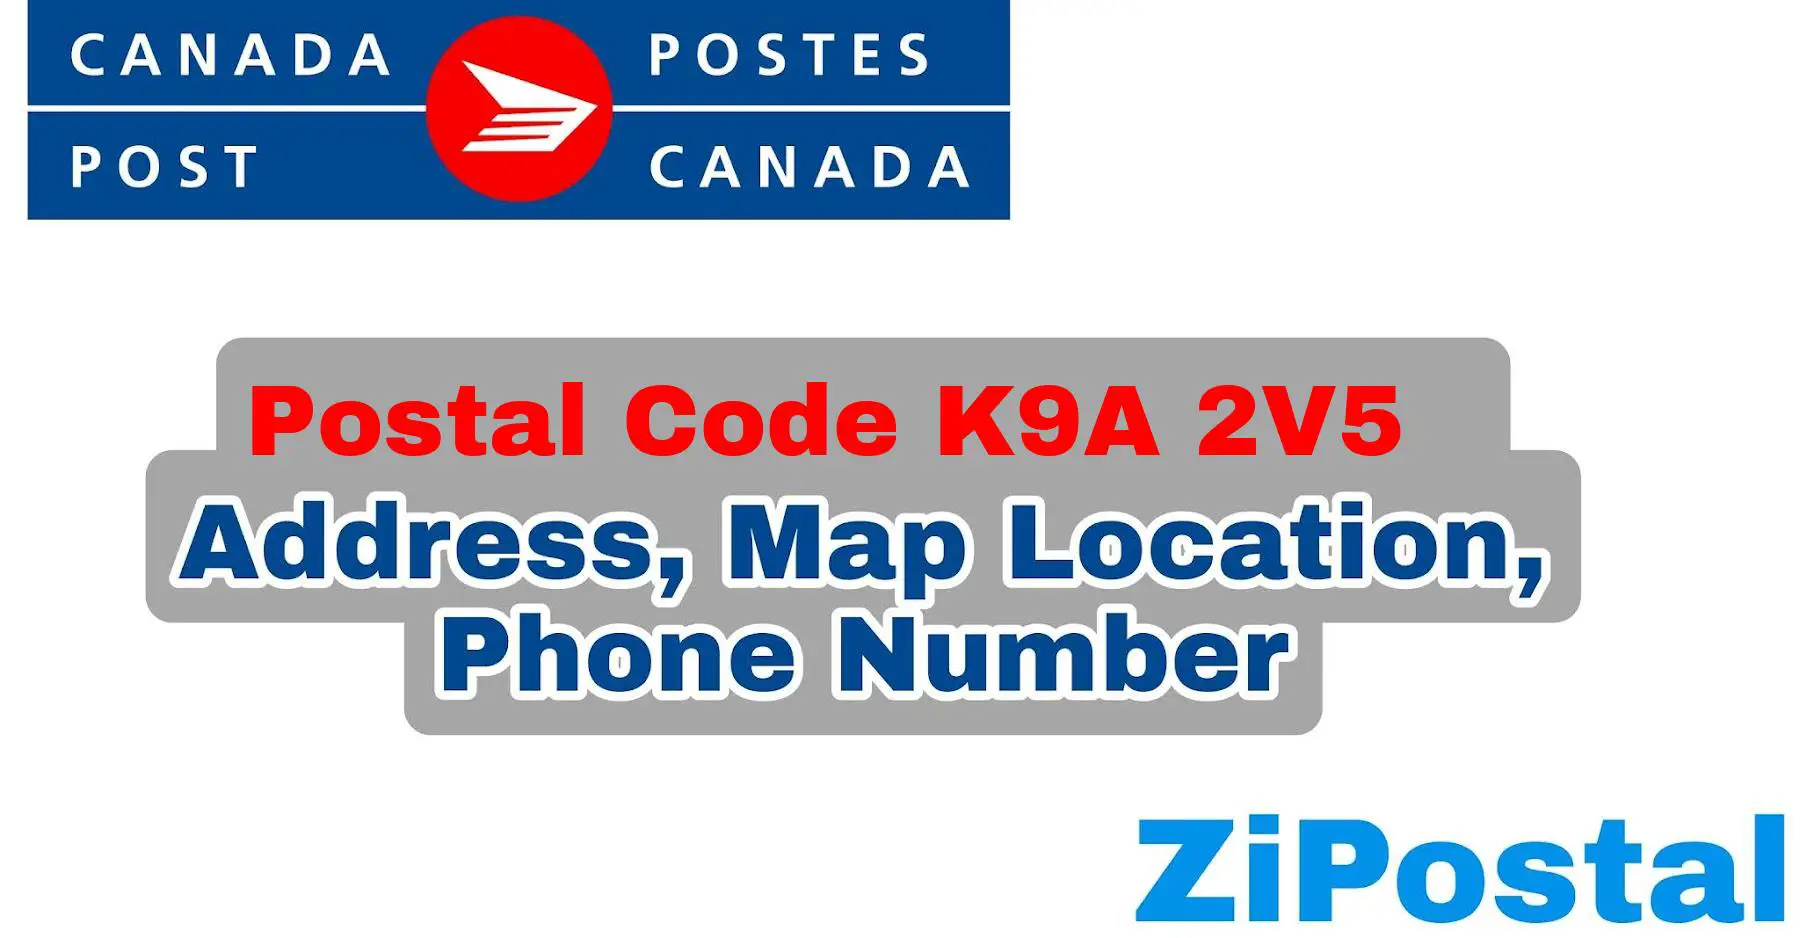 Postal Code K9A 2V5 Address Map Location and Phone Number